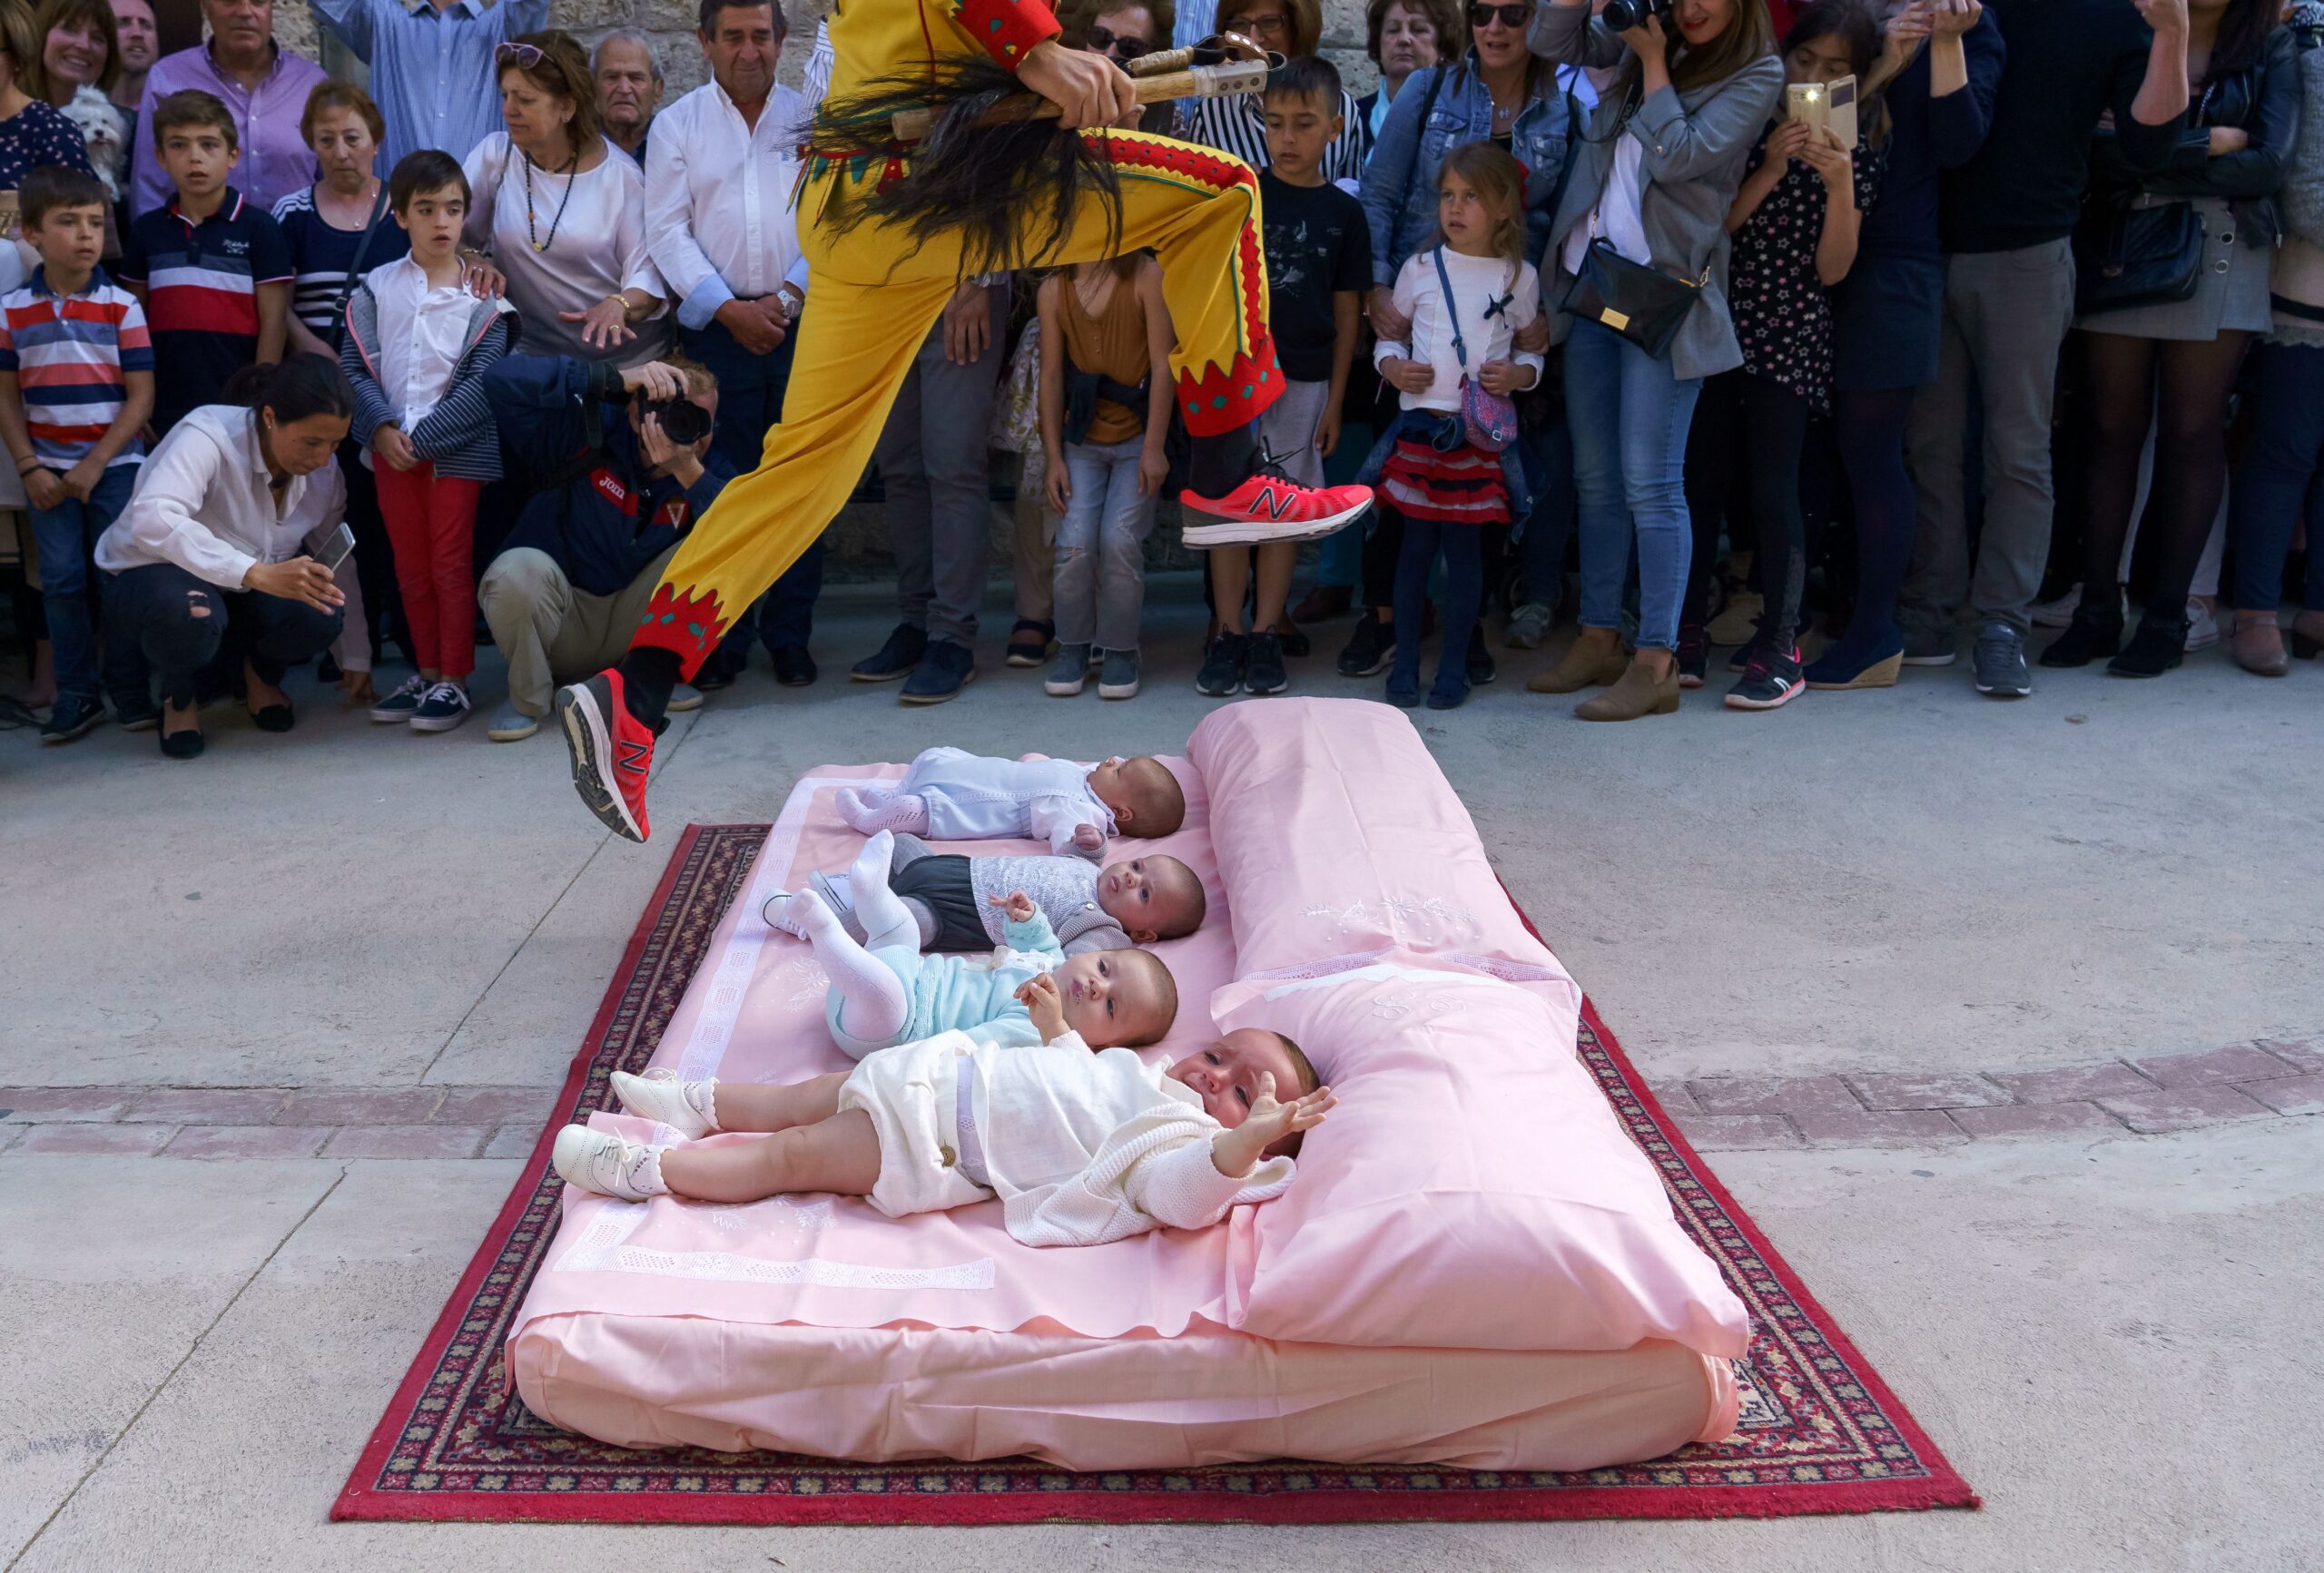 El Colacho, a baby-jumping festival, is a unique Spanish tradition to keep devil away